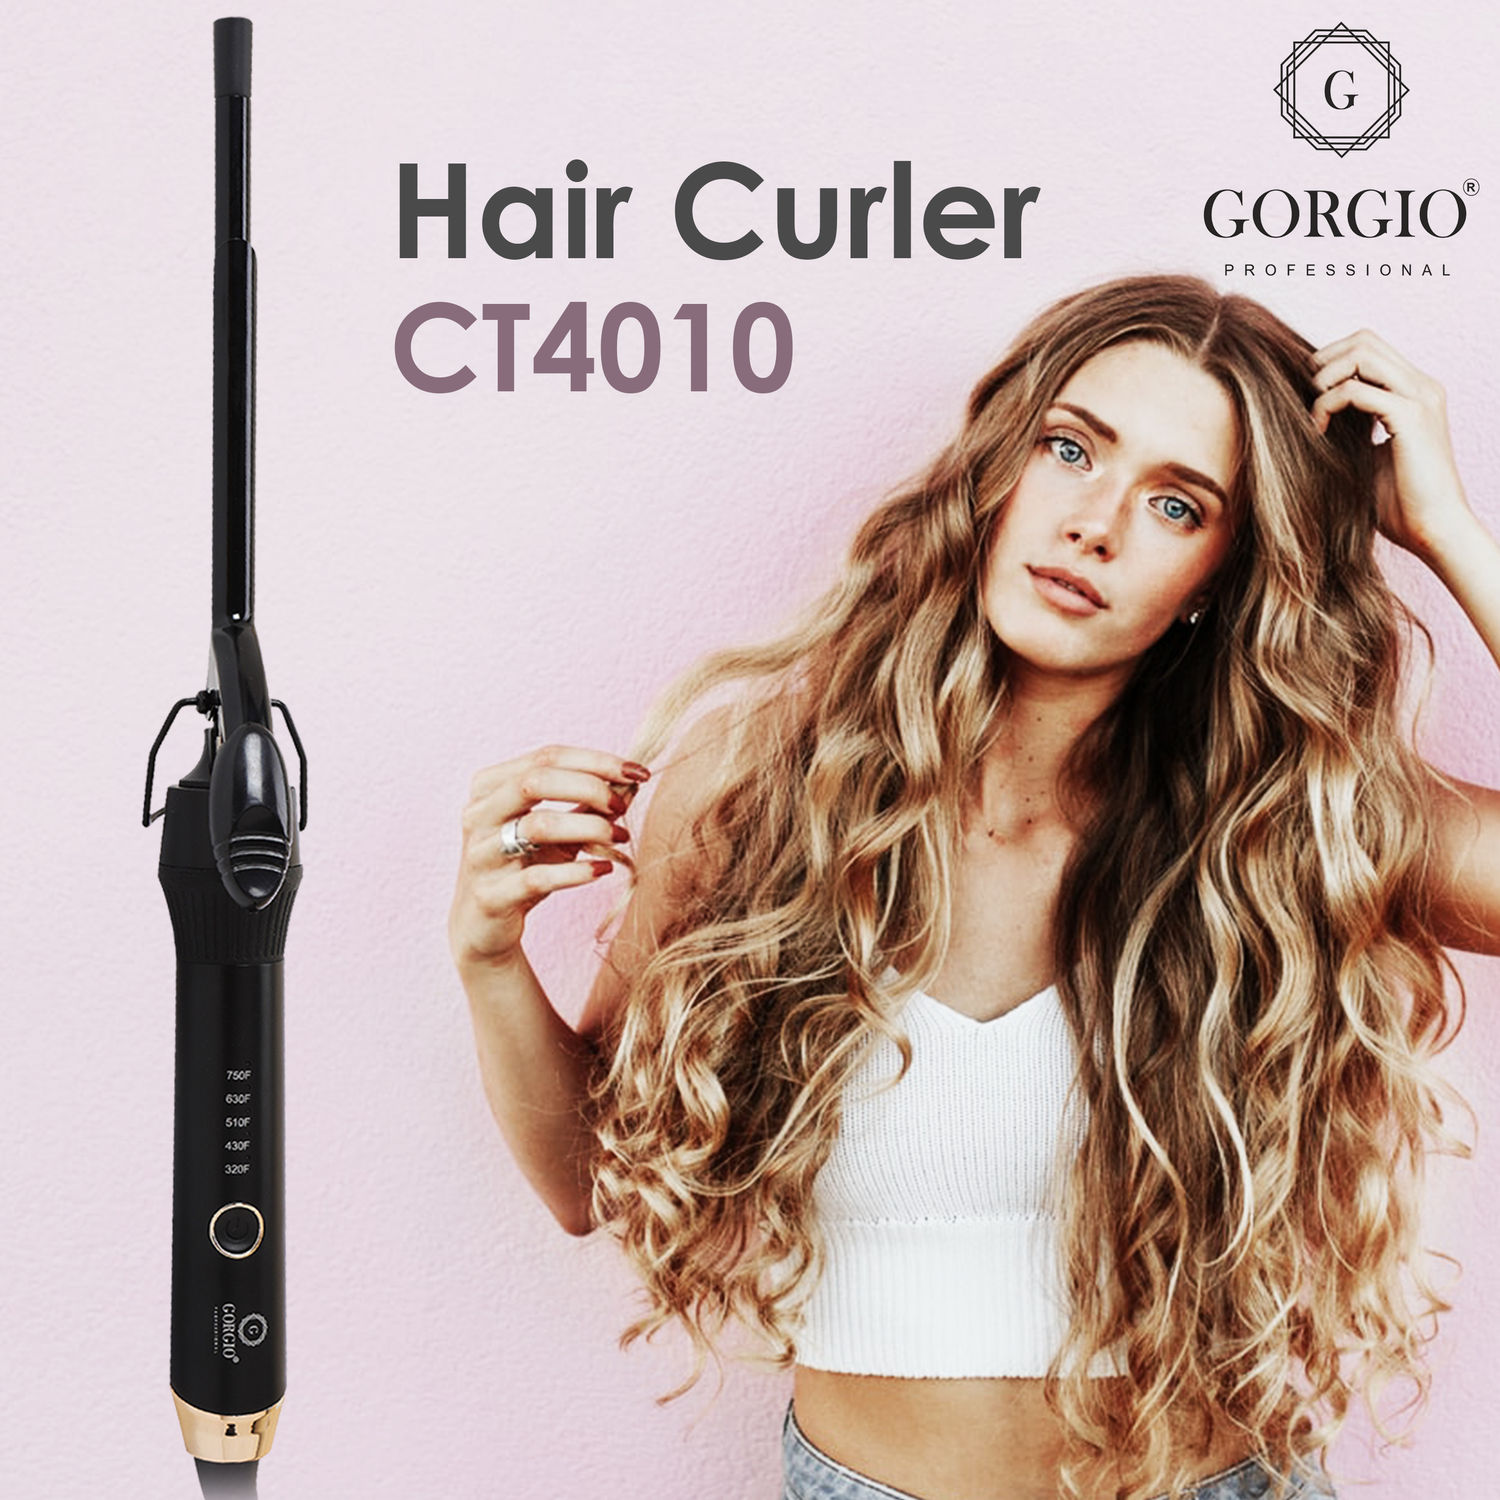 Light Weight Ikonic Professional Hair Curling Tong For Ladies Uses at Best  Price in Agra  Sanket Collection